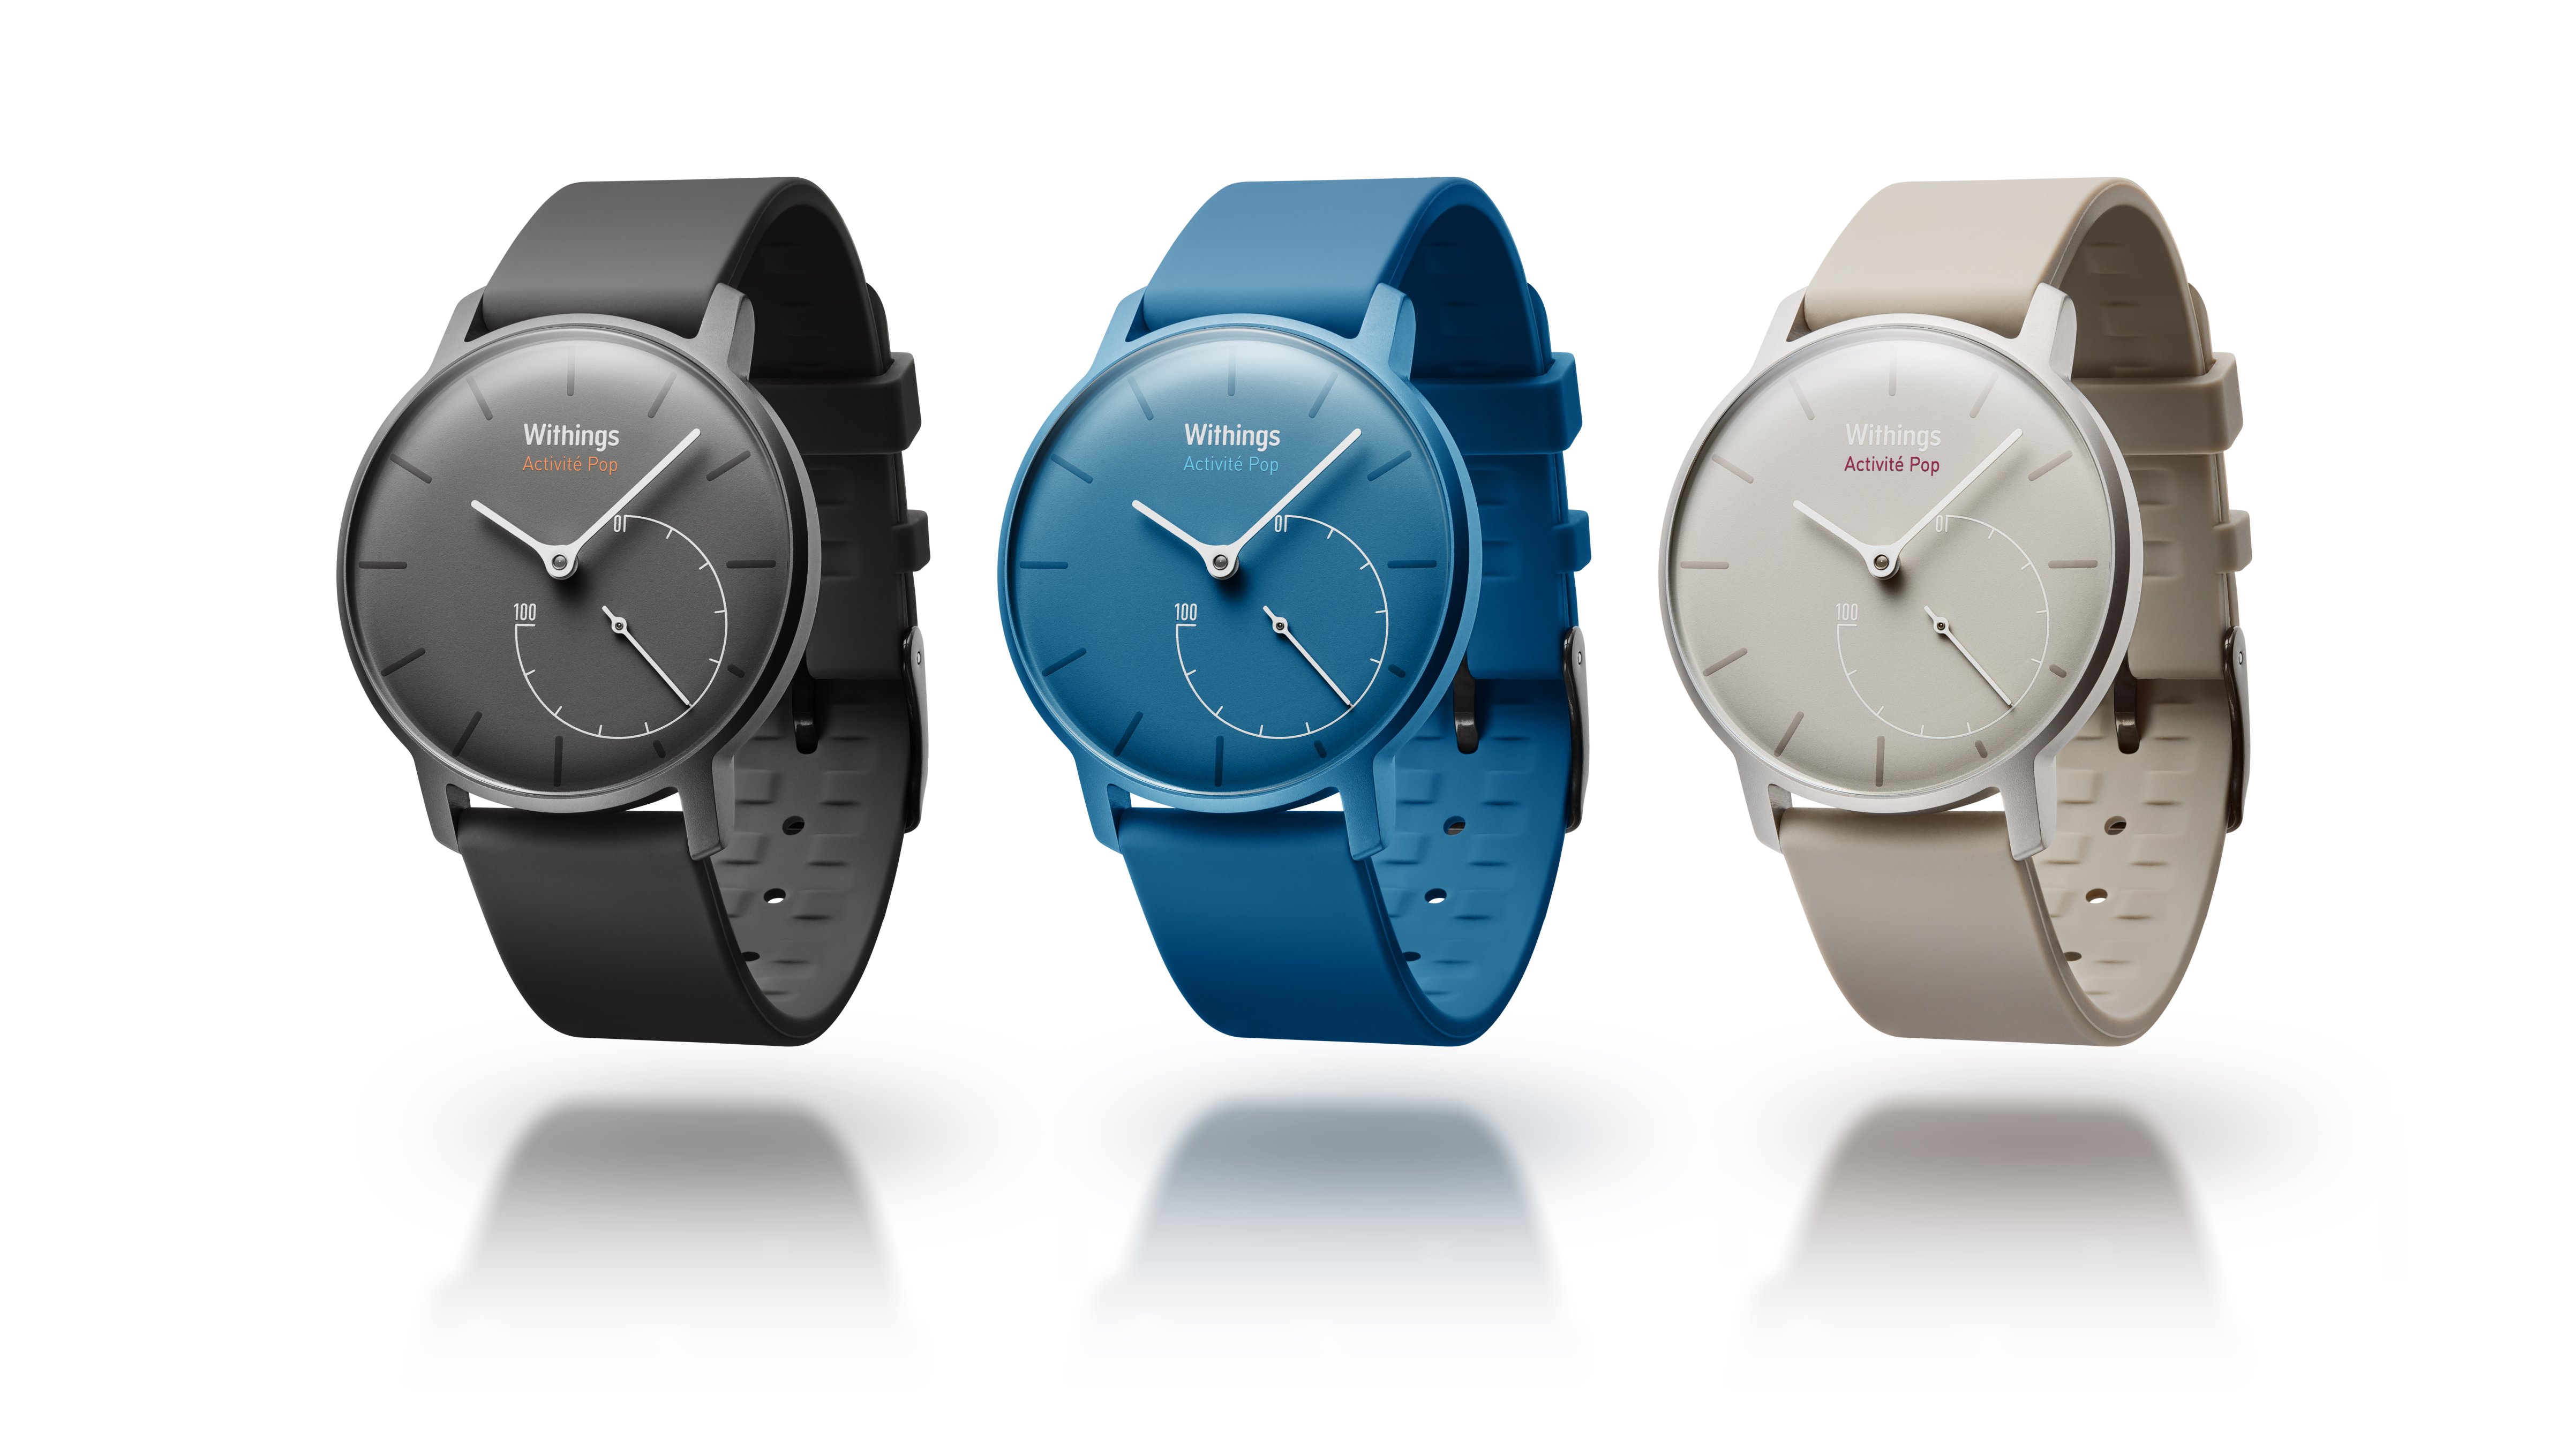 Activité Pop (Withings)